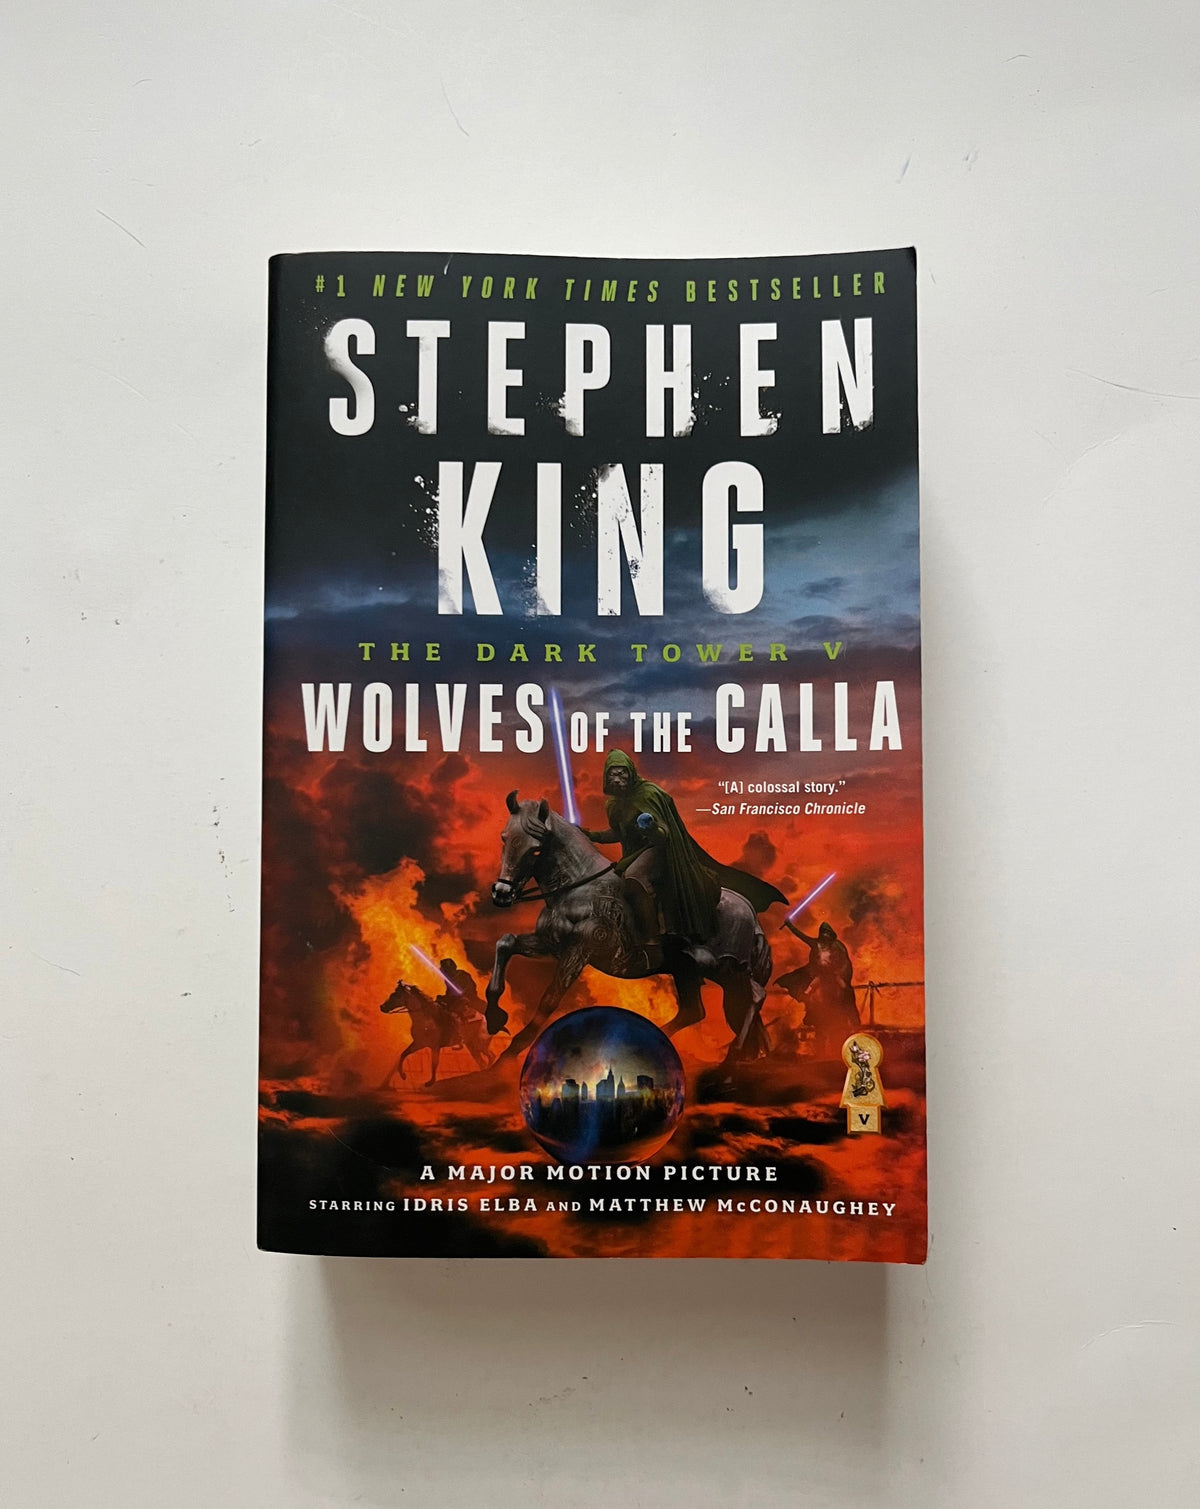 DONATE: The Dark Tower V: Wolves of the Calla by Stephen King